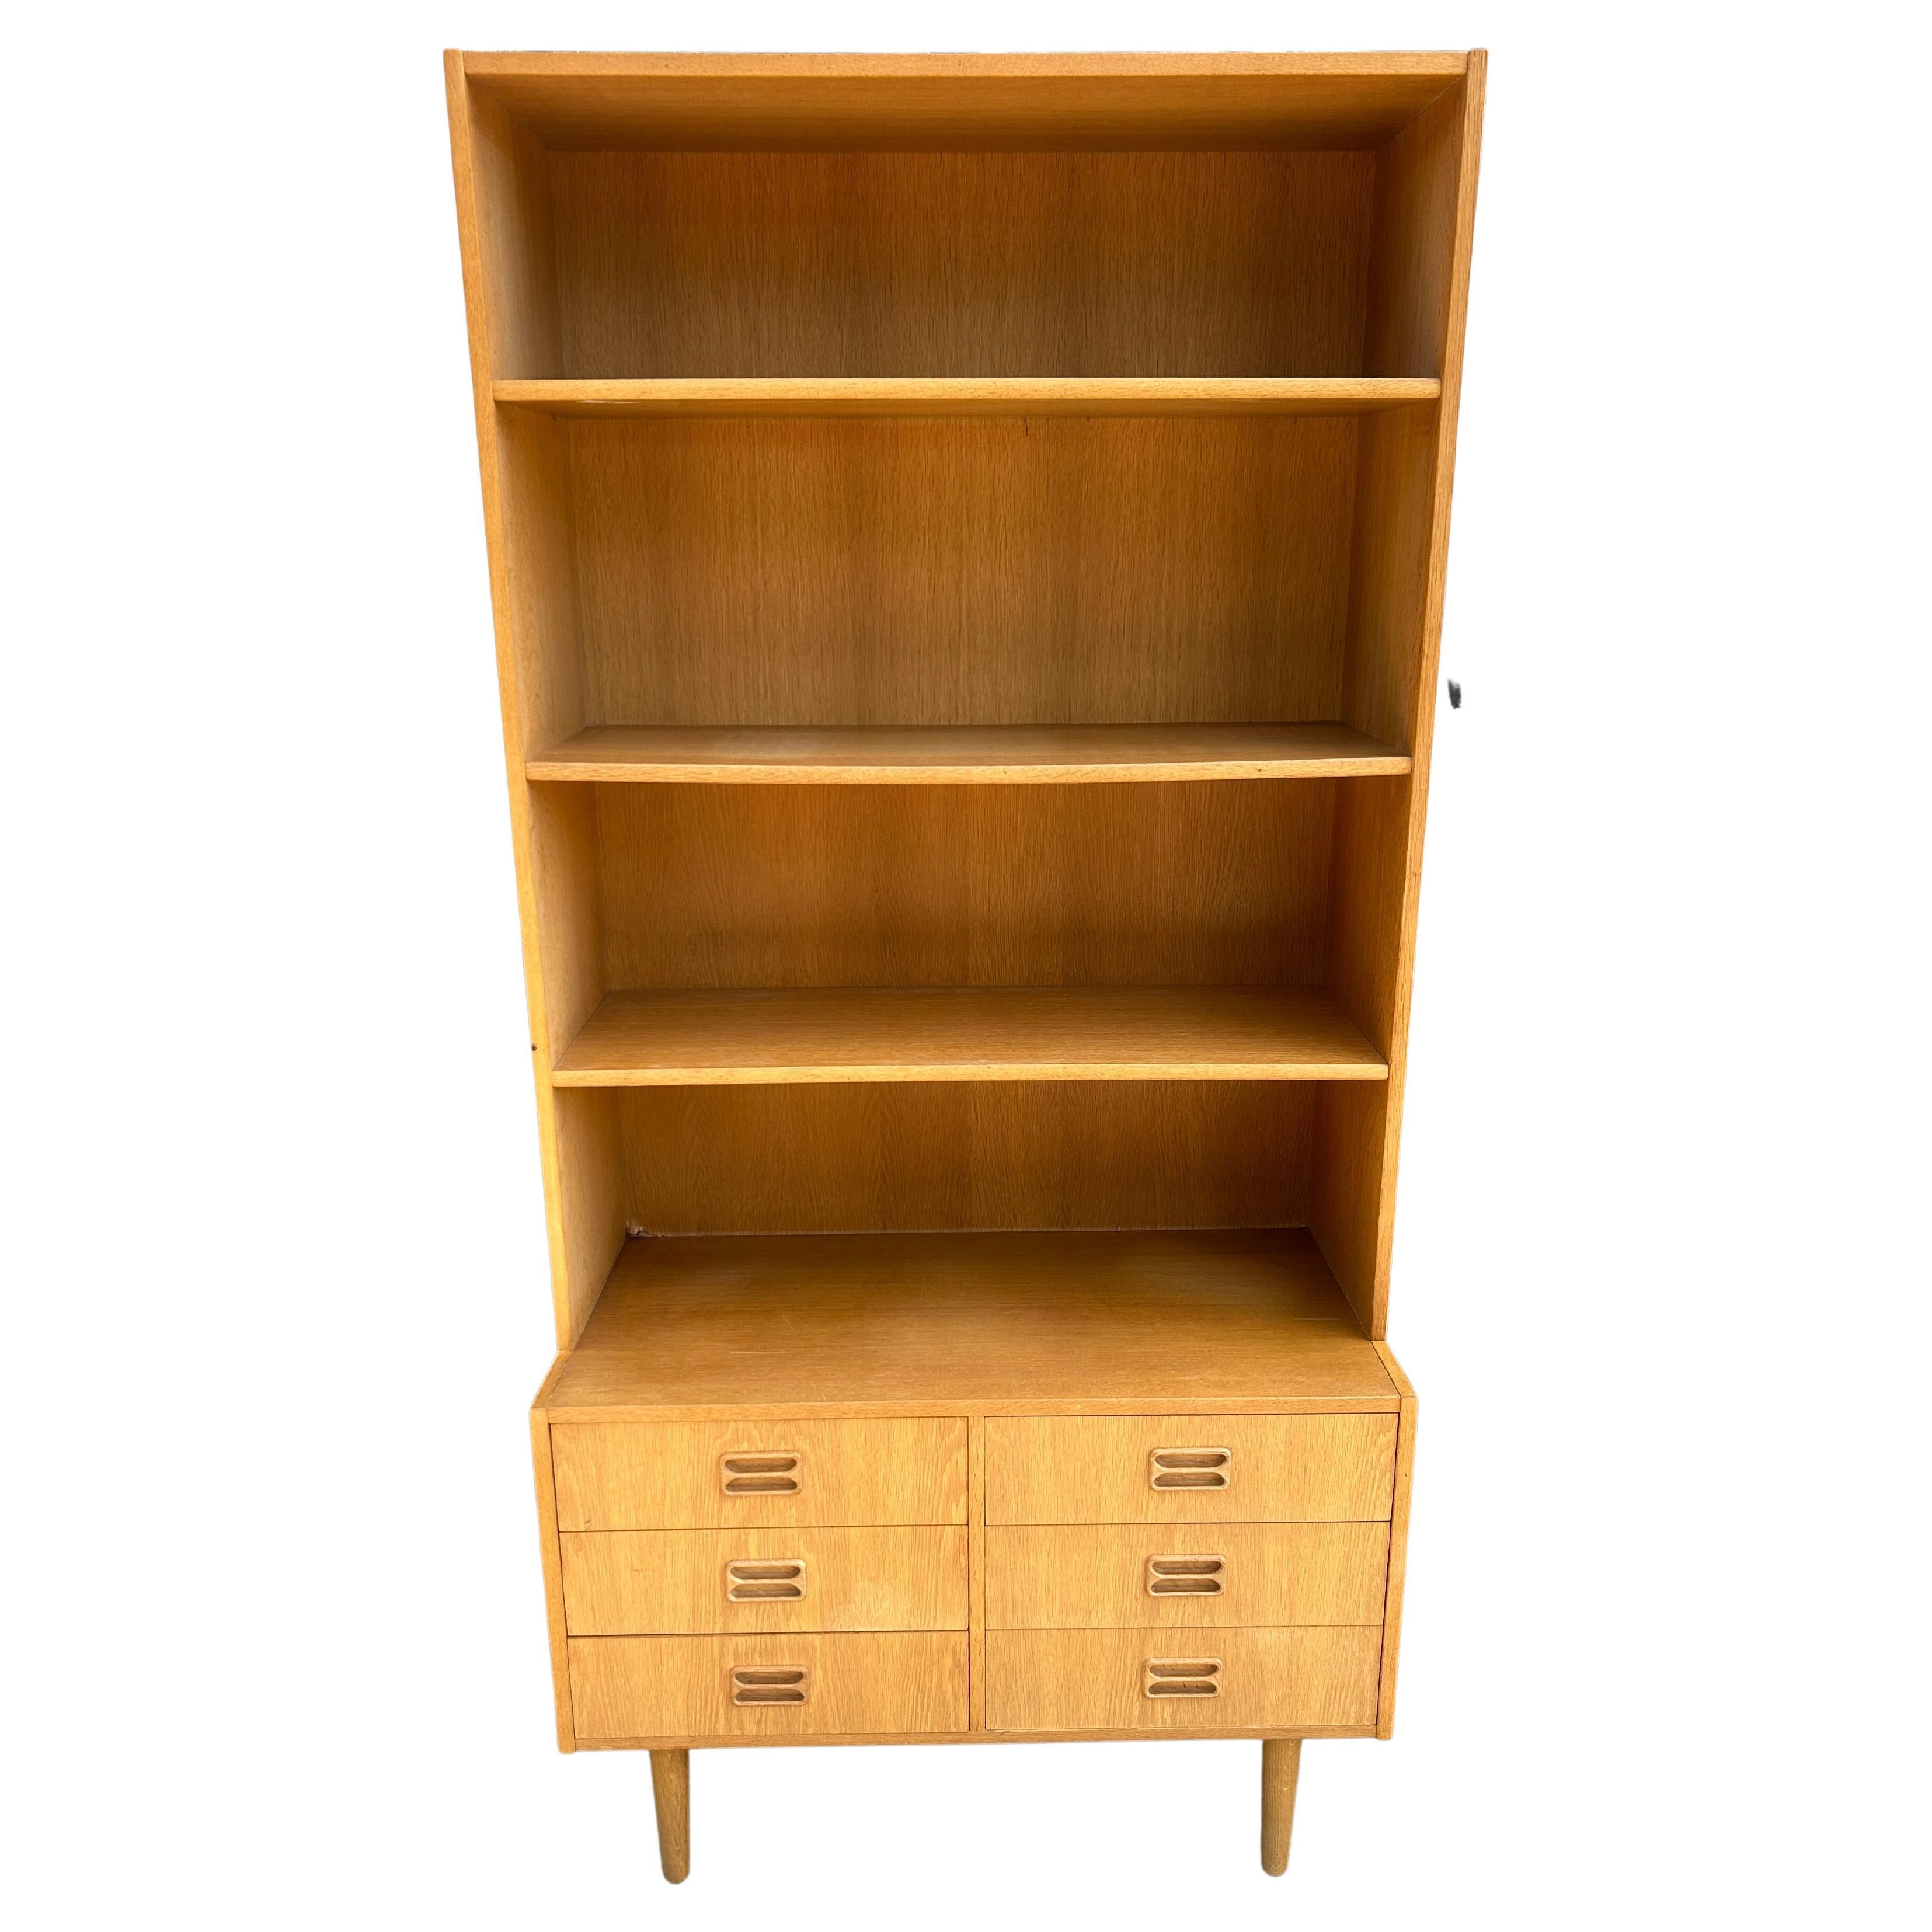 Midcentury Danish Modern Tall White Oak Bookcase with Lower 6 Drawer Dresser For Sale